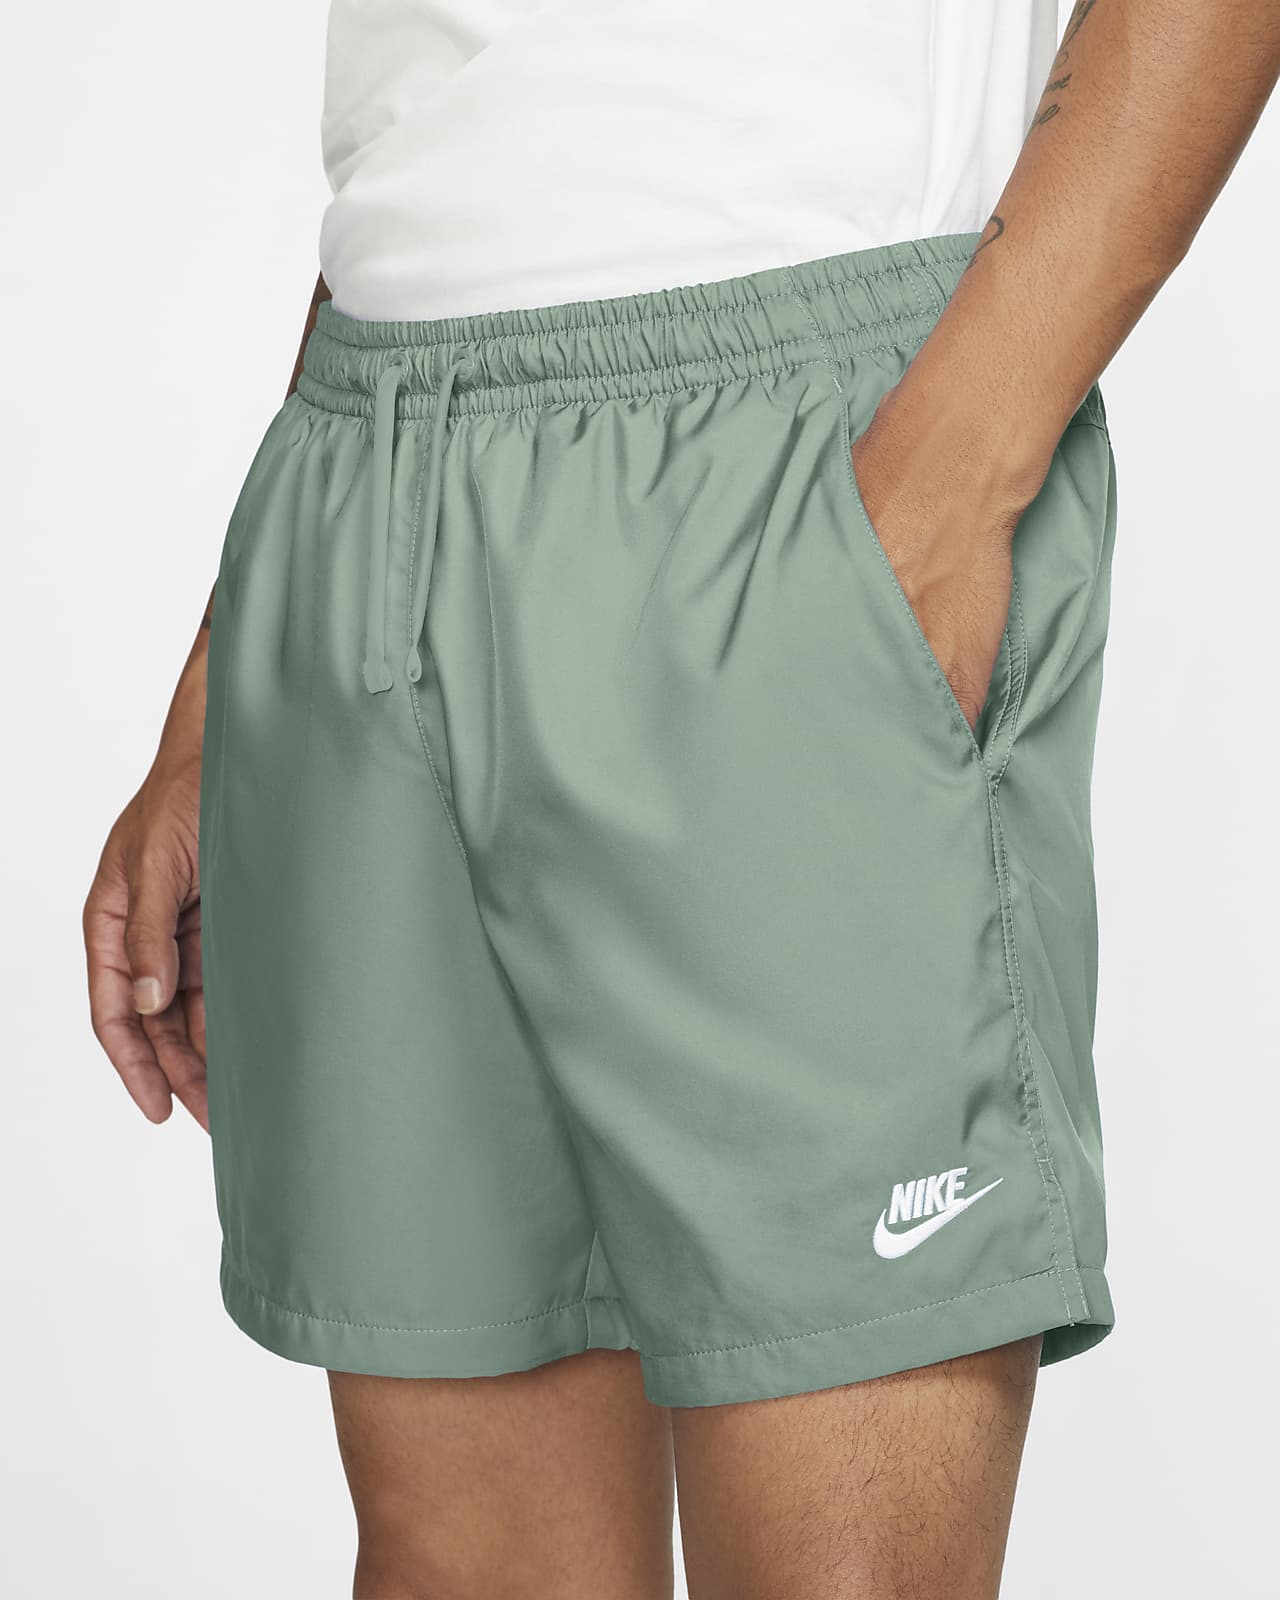 Buy > nike club essentials woven shorts > in stock